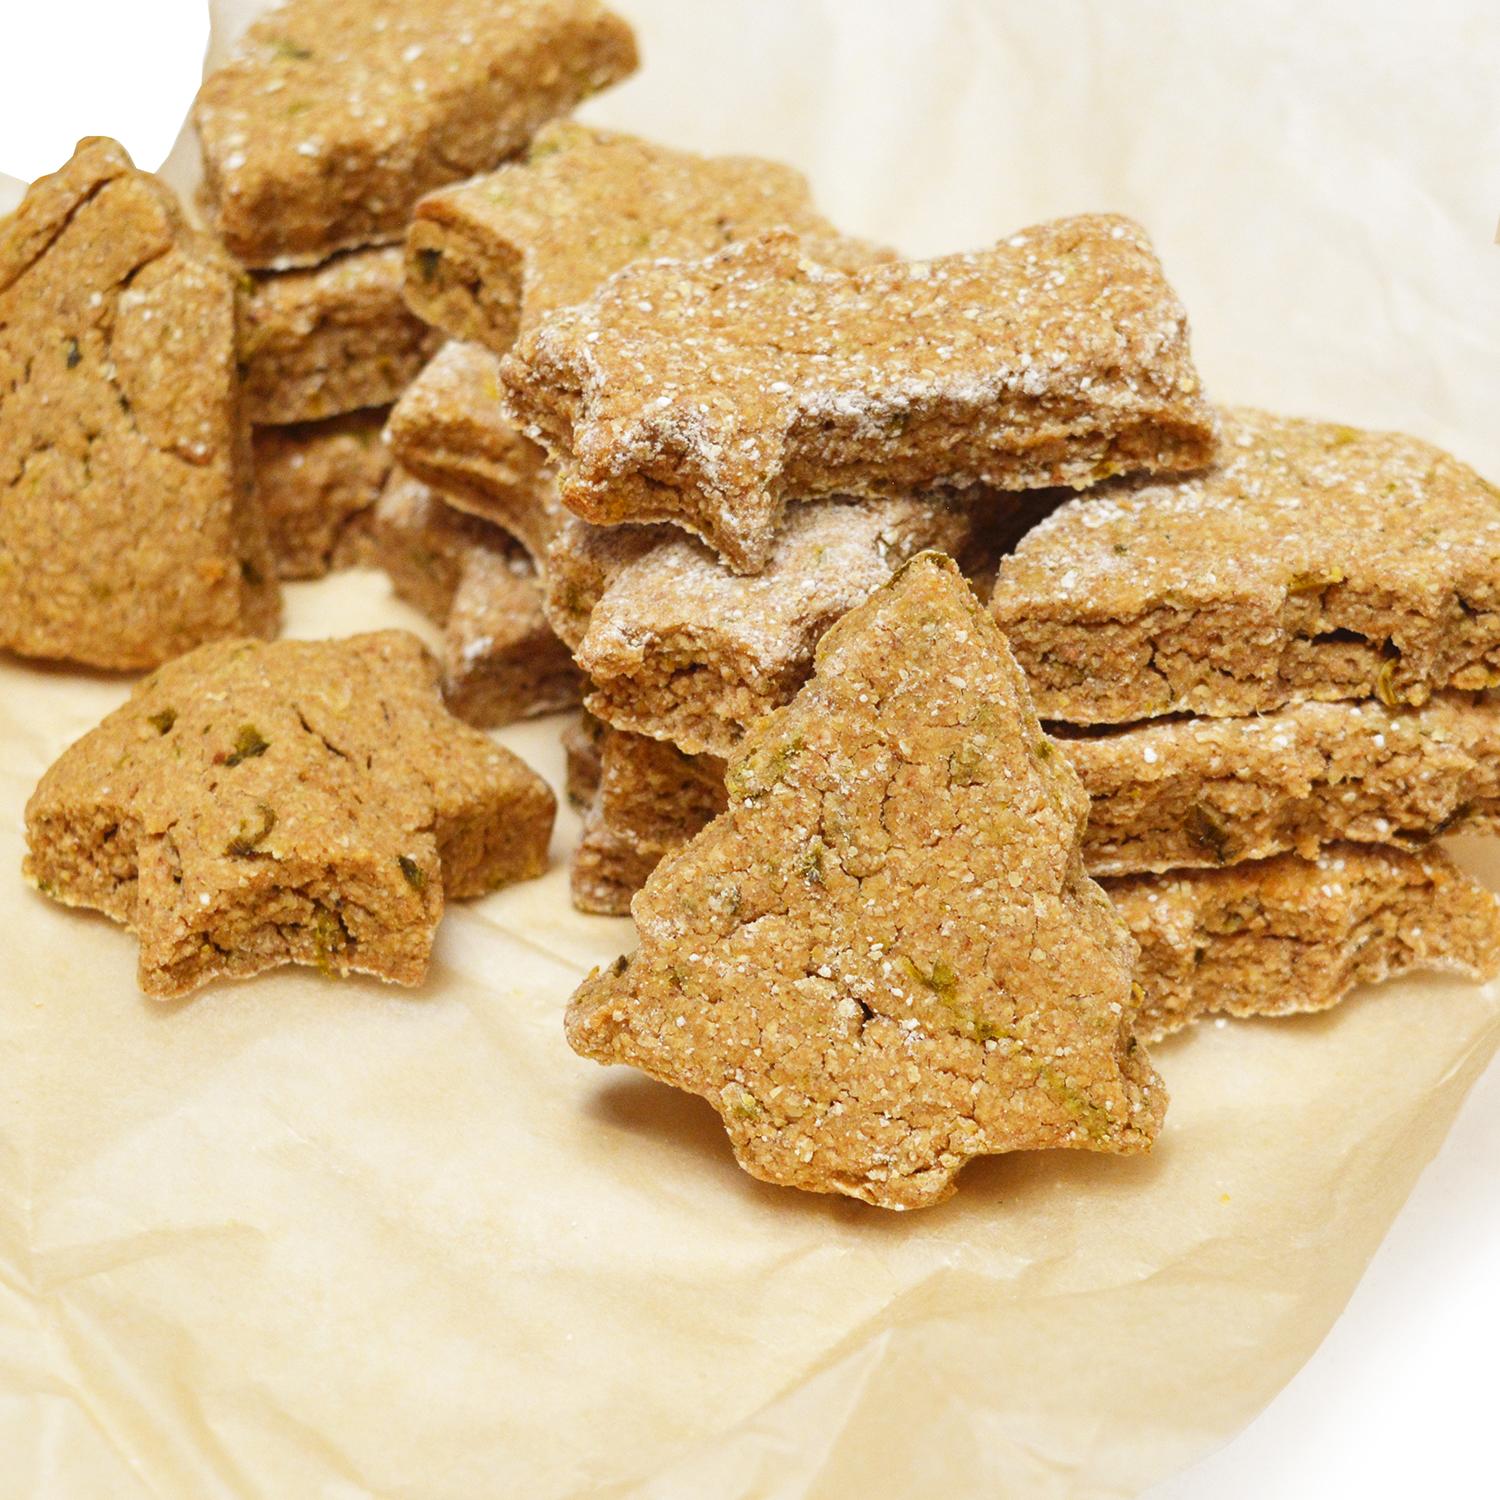 An arrangement of Booster Plant-based Vegan Christmas Dog Biscuits